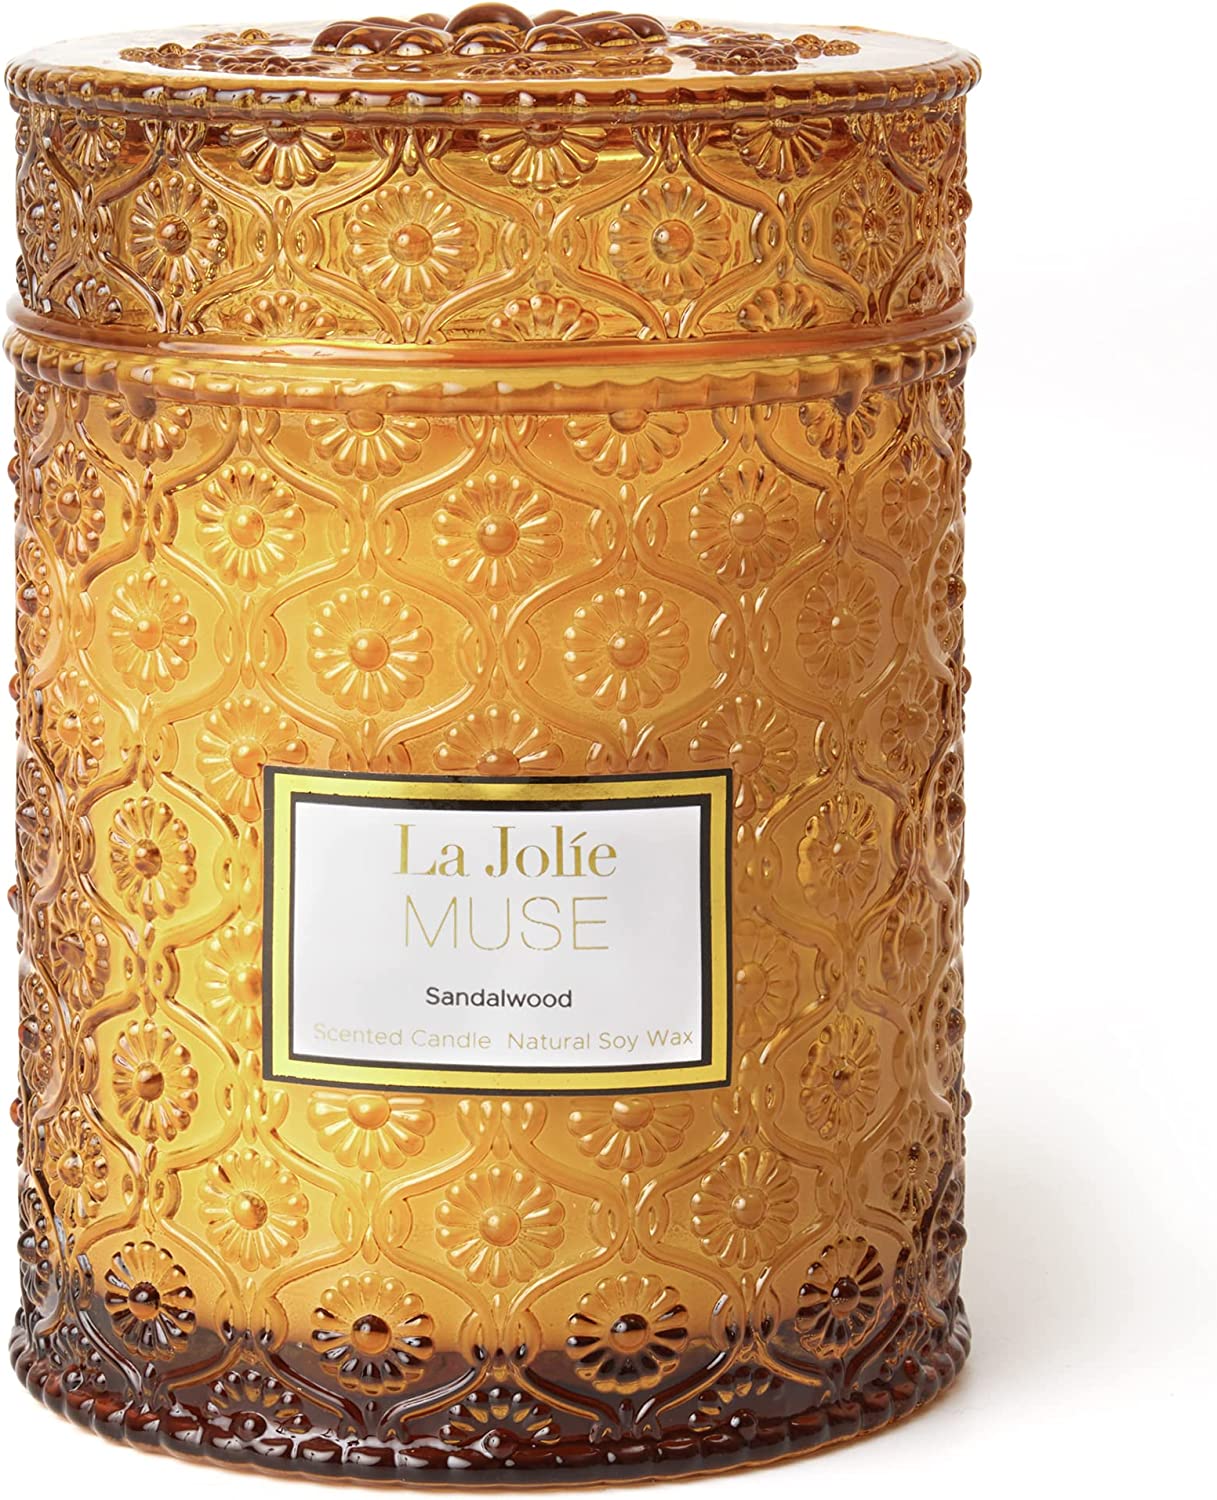 One LA JOLIE MUSE Wood Wick Sandalwood Scented Candle 